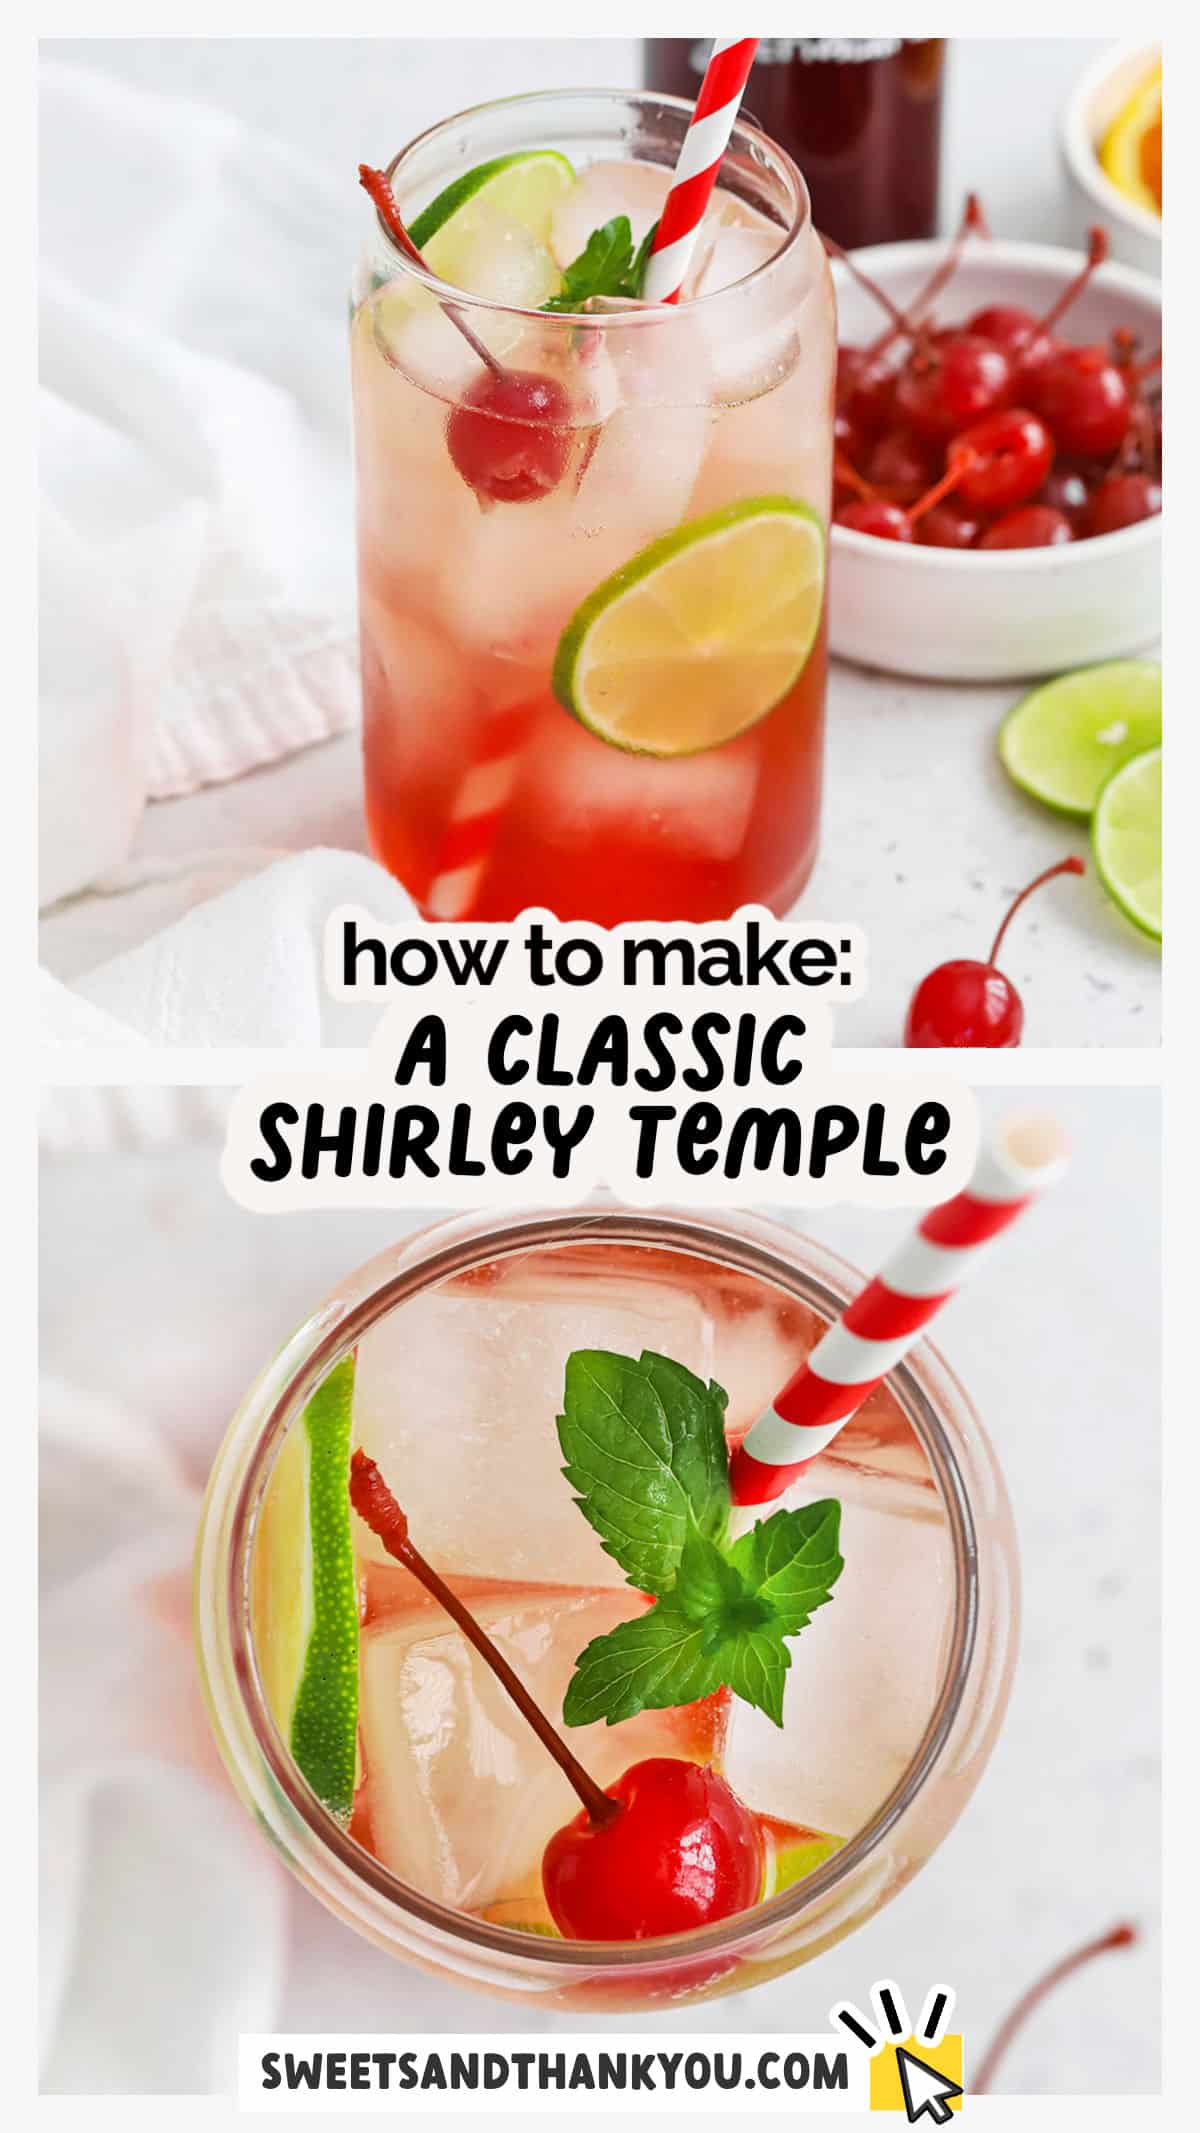 Let's make a Classic Shirley Temple Drink! Learn how to make a Shirley Temple mocktail with this easy recipe. It's kid-friendly, non-alcoholic & fun! 